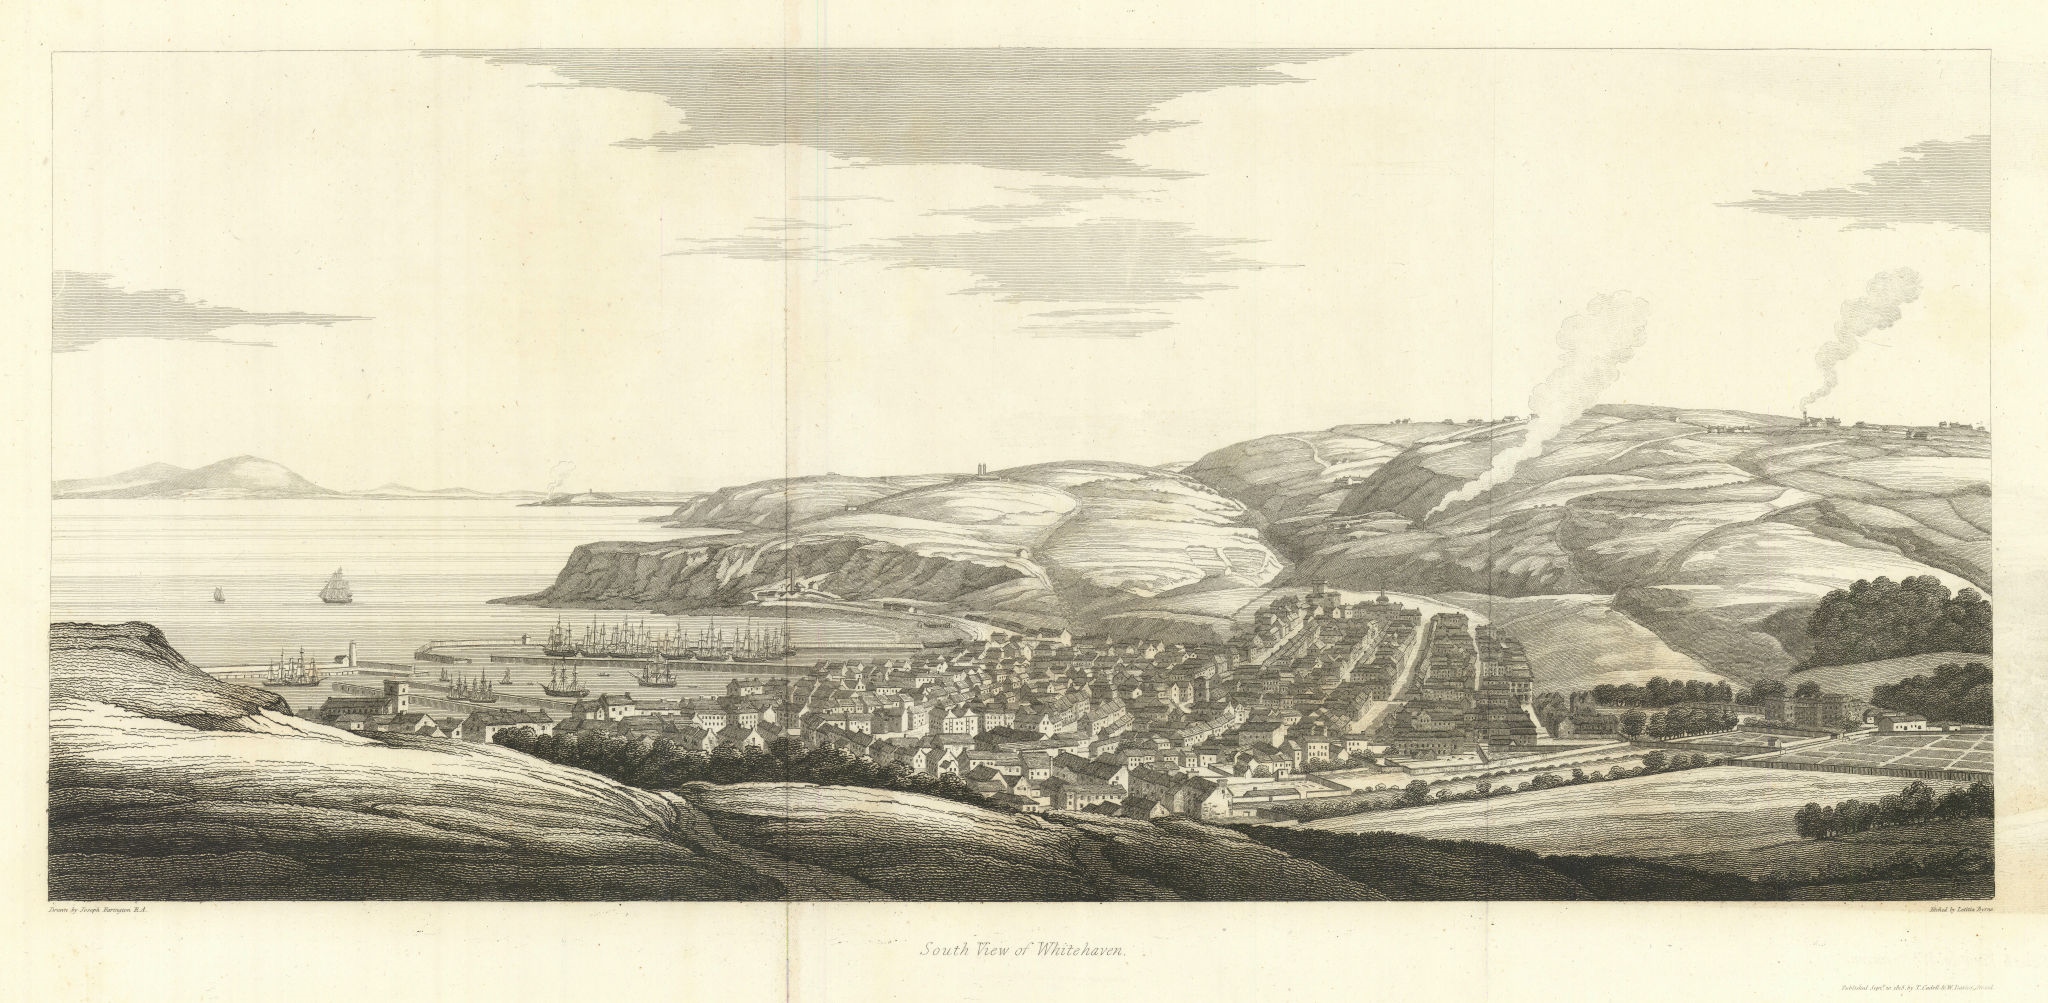 South view of Whitehaven, Cumbria. Panorama by Joseph Farington 1816 old print